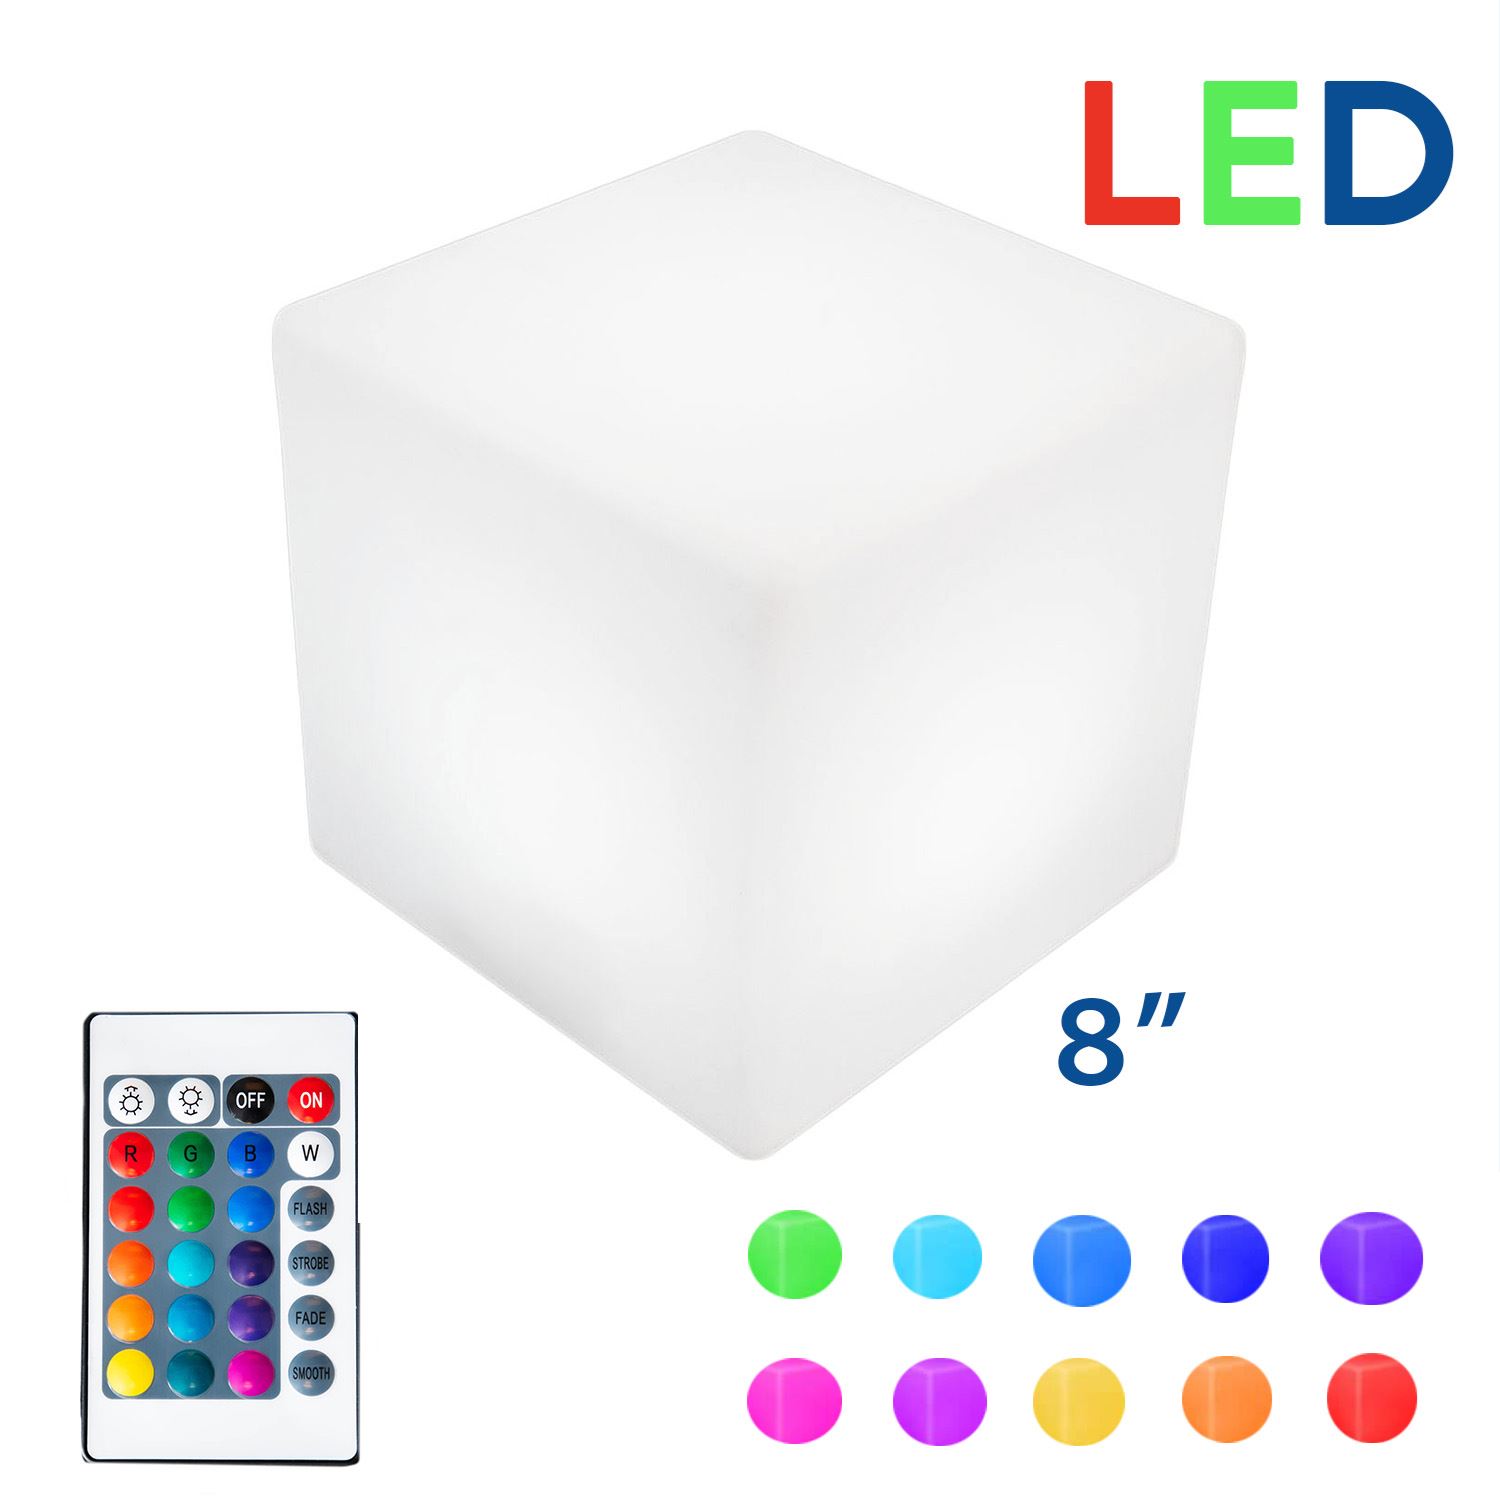 Novelty Lights 8" LED Plastic 3D Glow Cube Chair Light, Waterproof Rechargeable Color Changing Party Cube with Remote, Great for Home Patio Restaurant Lighting - image 4 of 7